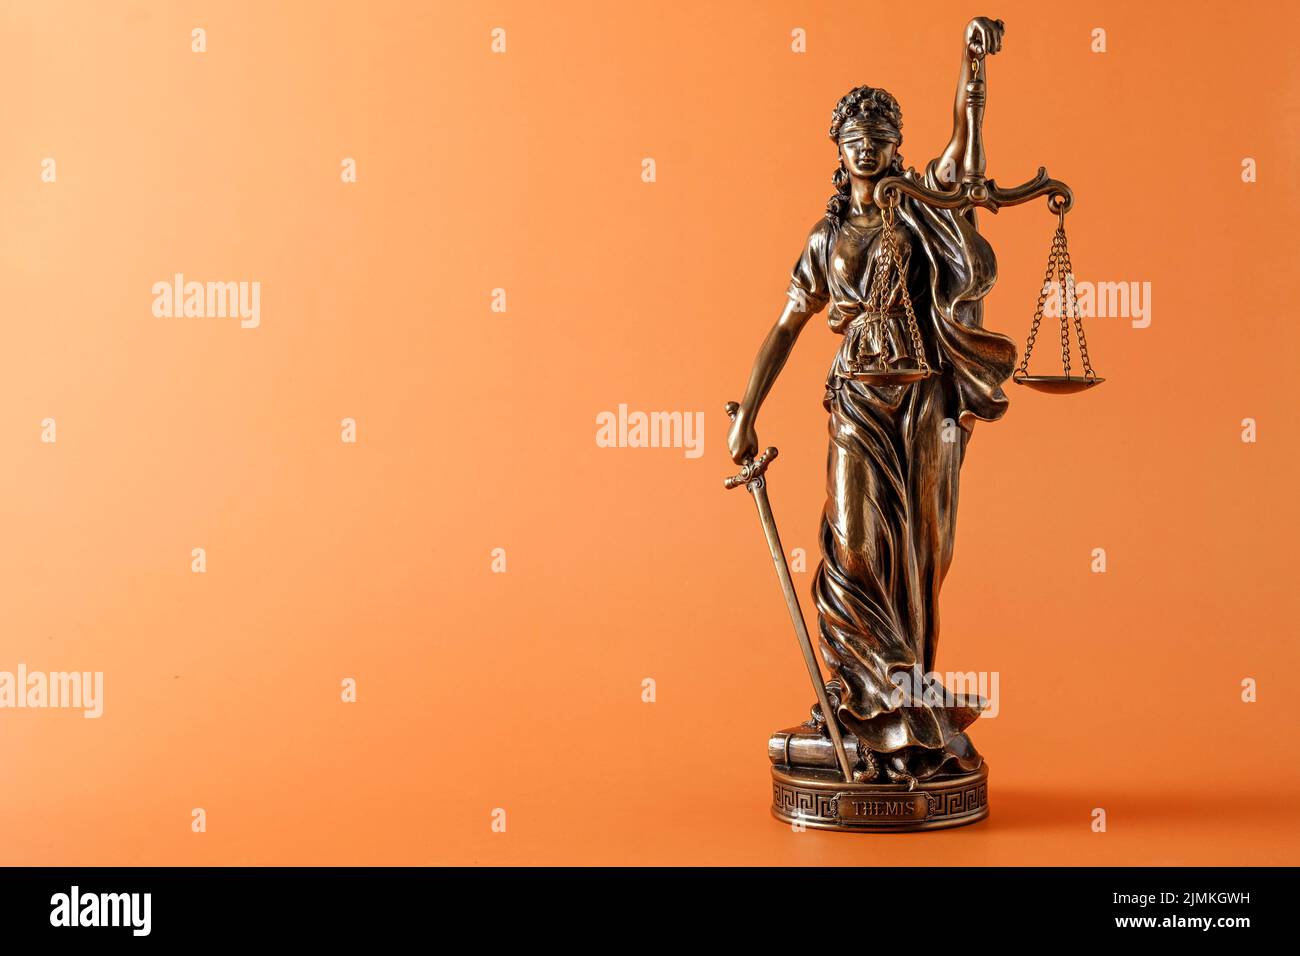 Statue of justice and justice Themis as a concept and symbol of freedom and equality. Stock Photo